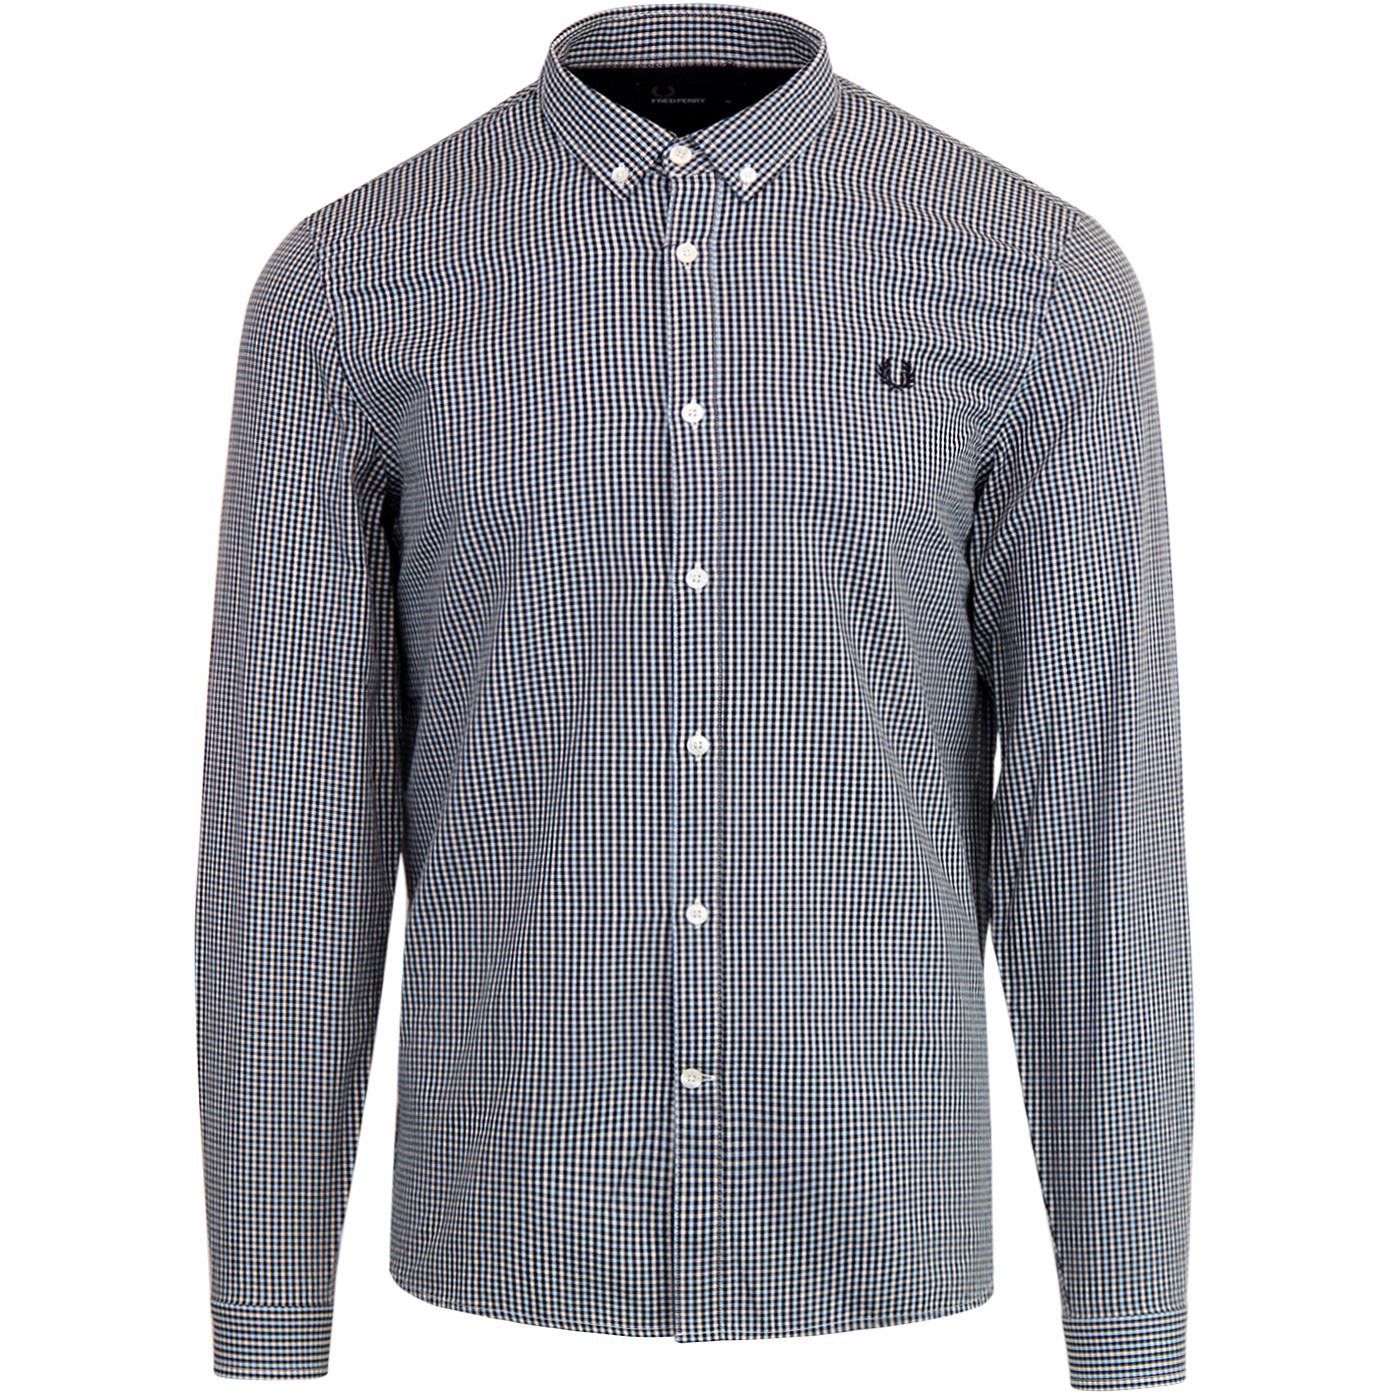 FRED PERRY Retro Mod Basketweave Check Shirt Ice Blue